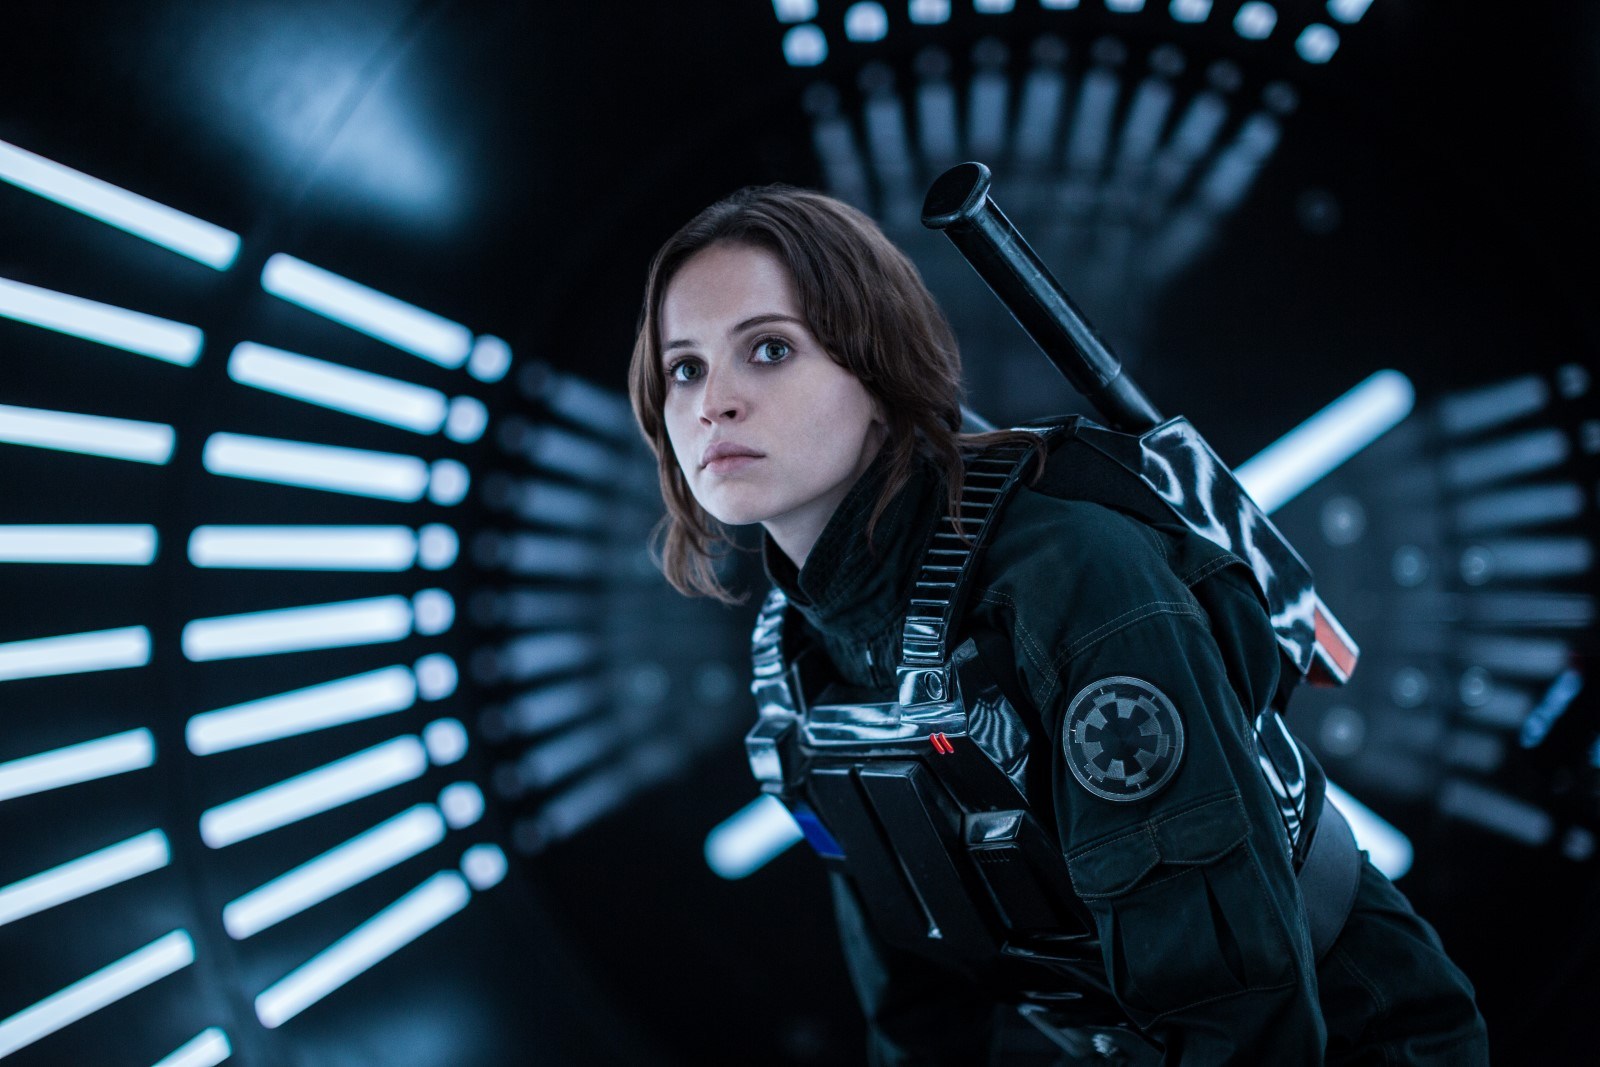 [CRITIQUE] ROGUE ONE: A STAR WARS STORY